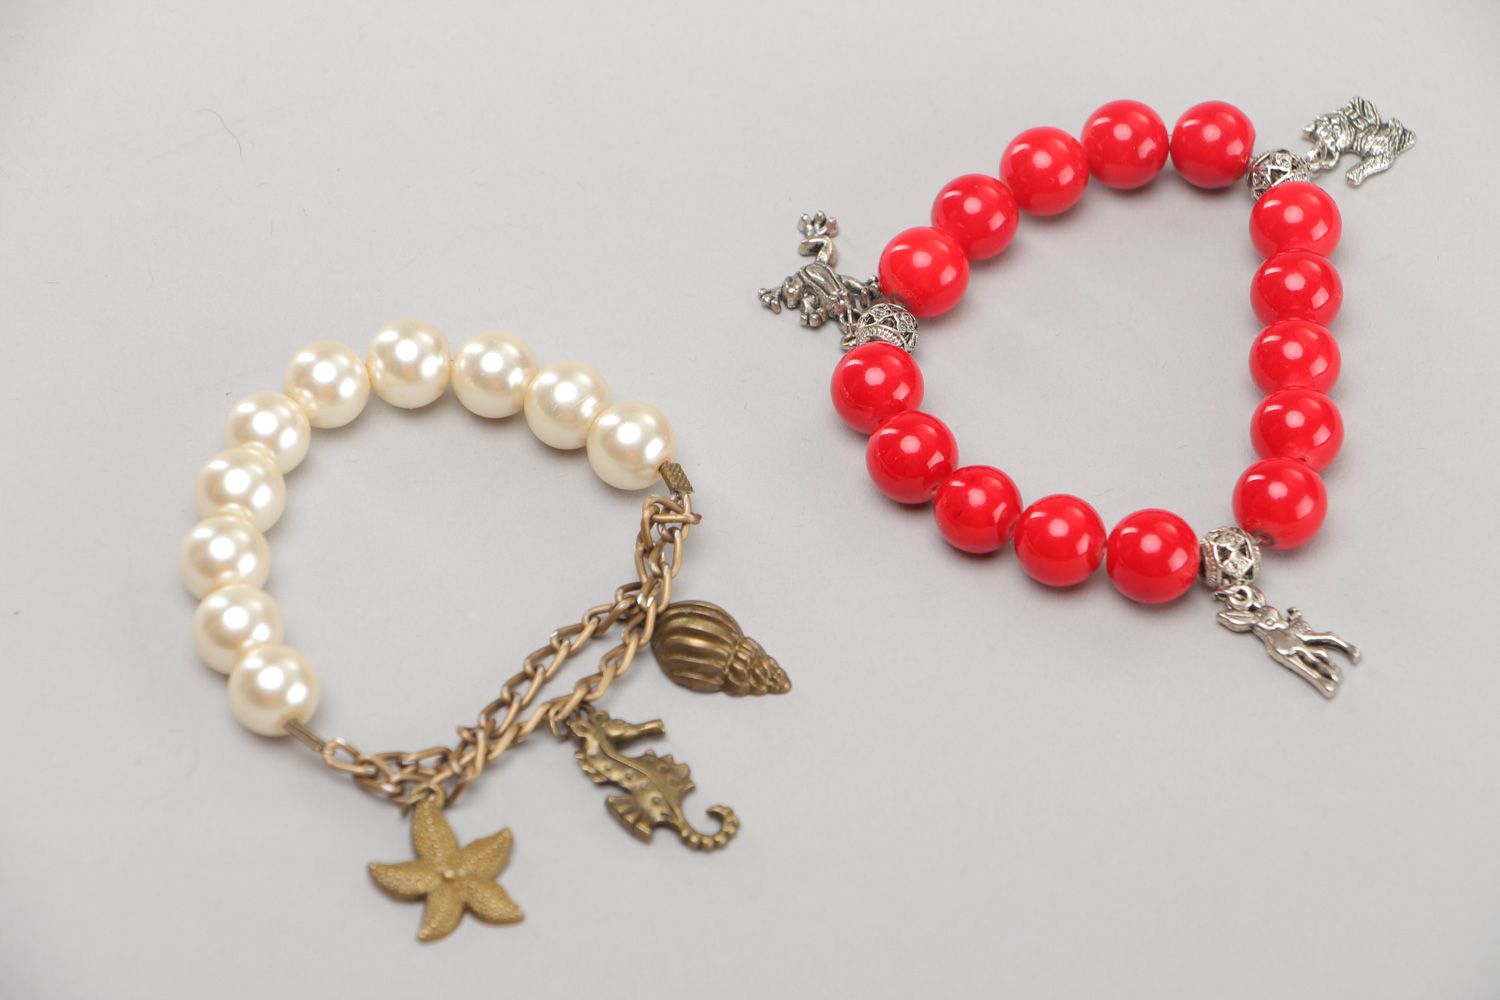 Designer handmade wrist bracelets with red beads and metal charms 2 items photo 2